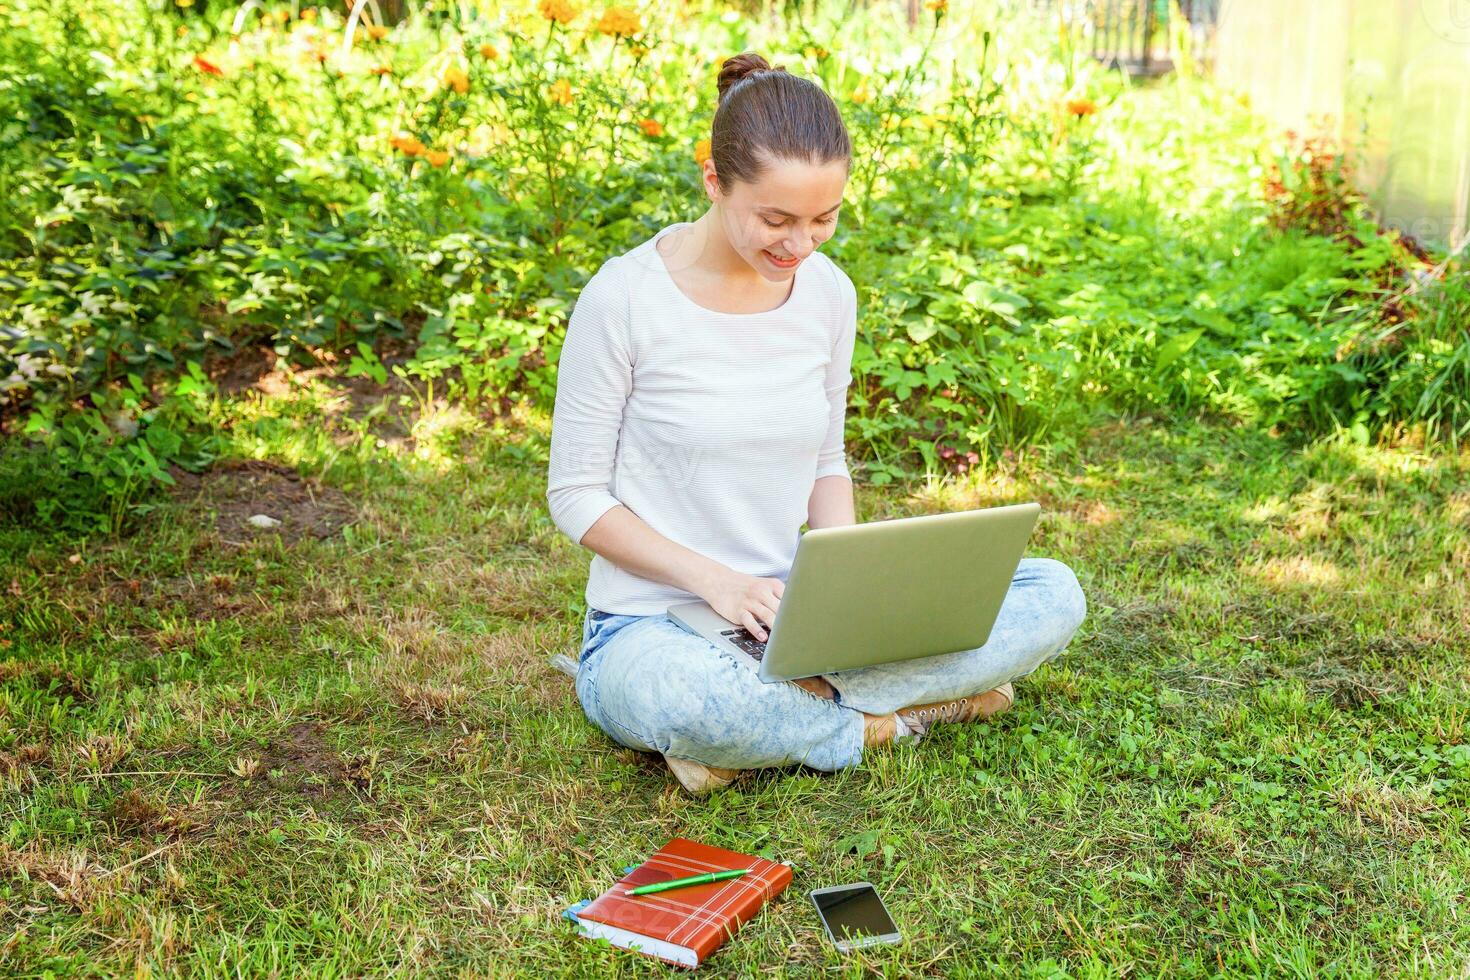 Young woman sitting on green grass lawn in city park working on laptop pc computer. Freelance business concept photo